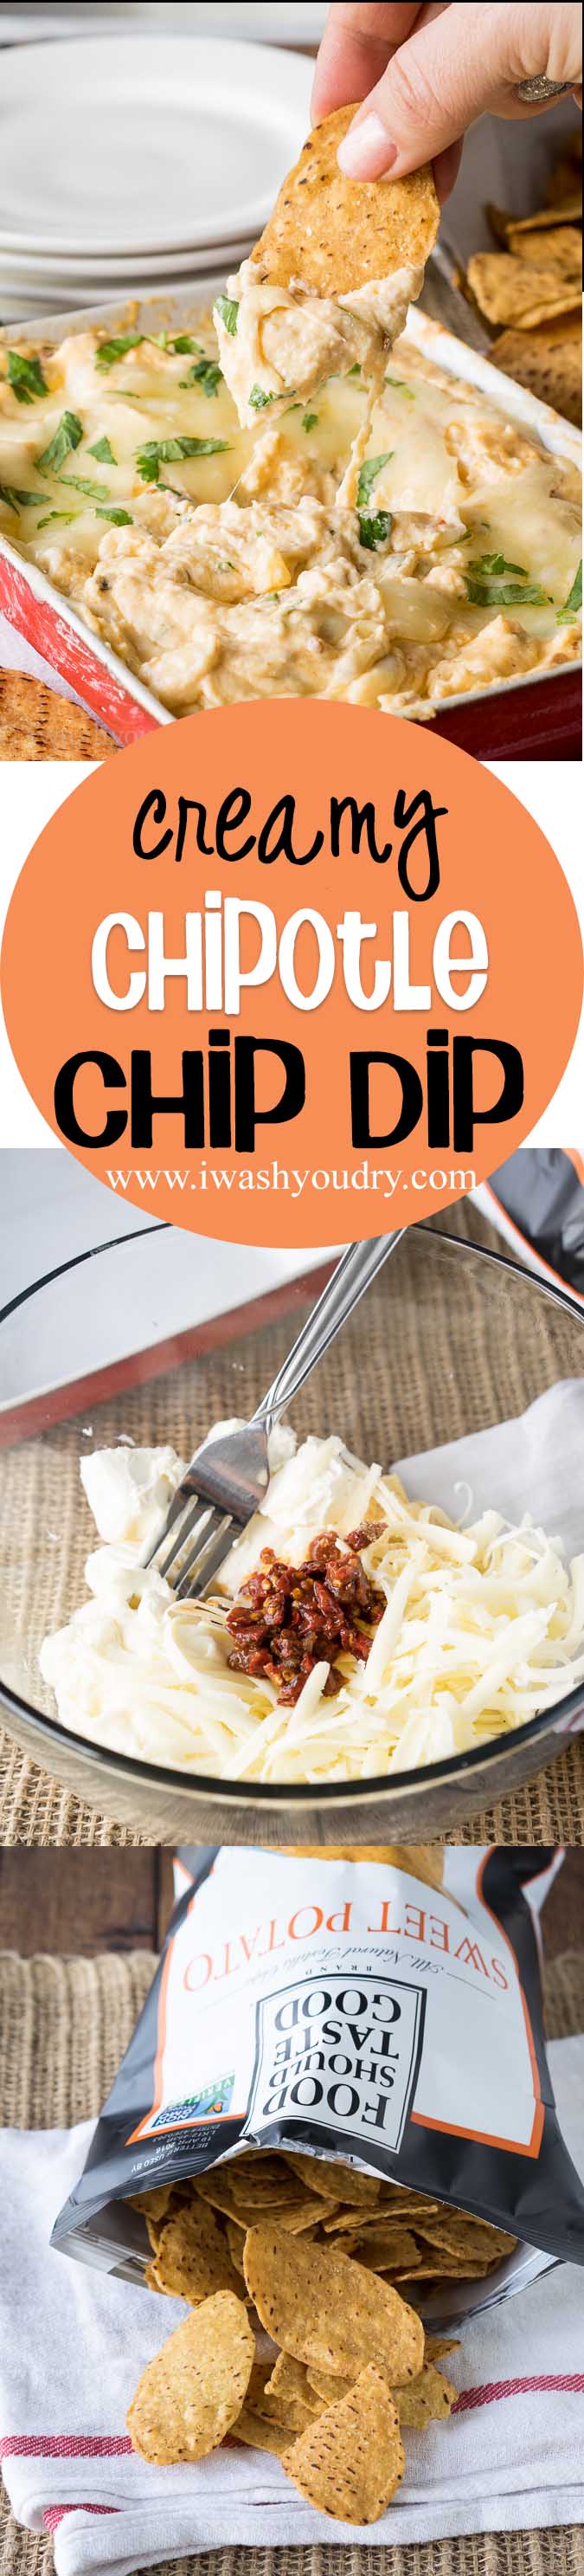 If you thought sweet potato fries were awesome, just wait till you try these sweet potato chips with this Creamy Hot Chipotle Dip! Come to mama!